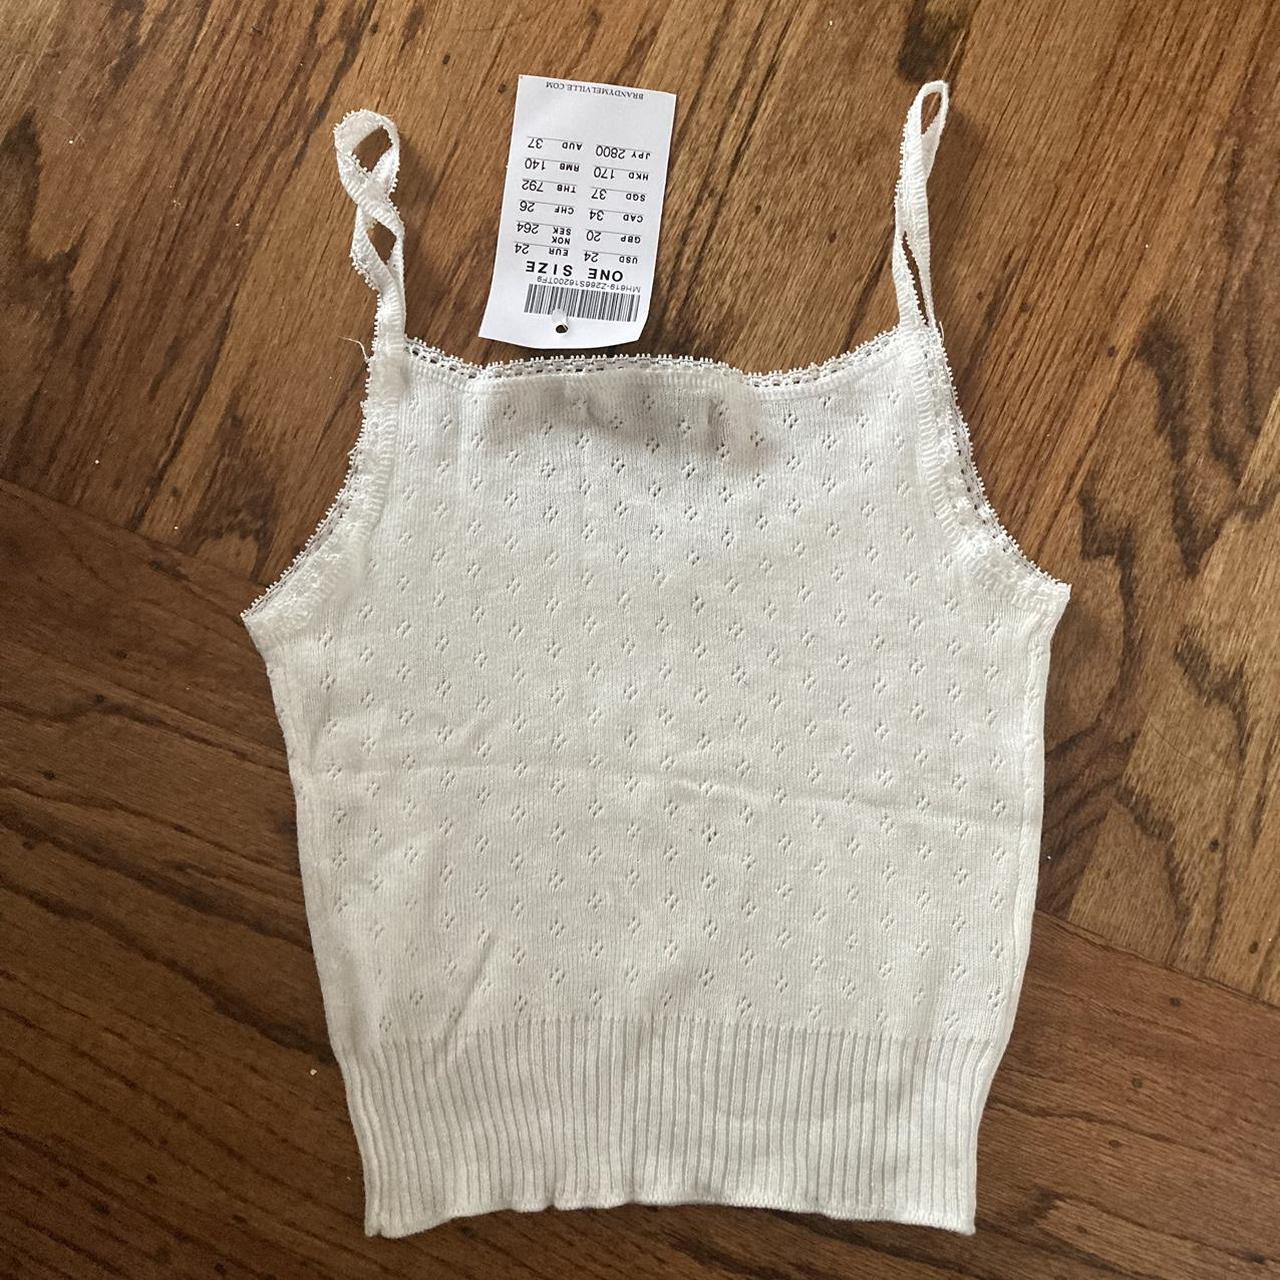 BRANDY MELVILLE White Small Eyelet Trim Lace Depop, 49% OFF